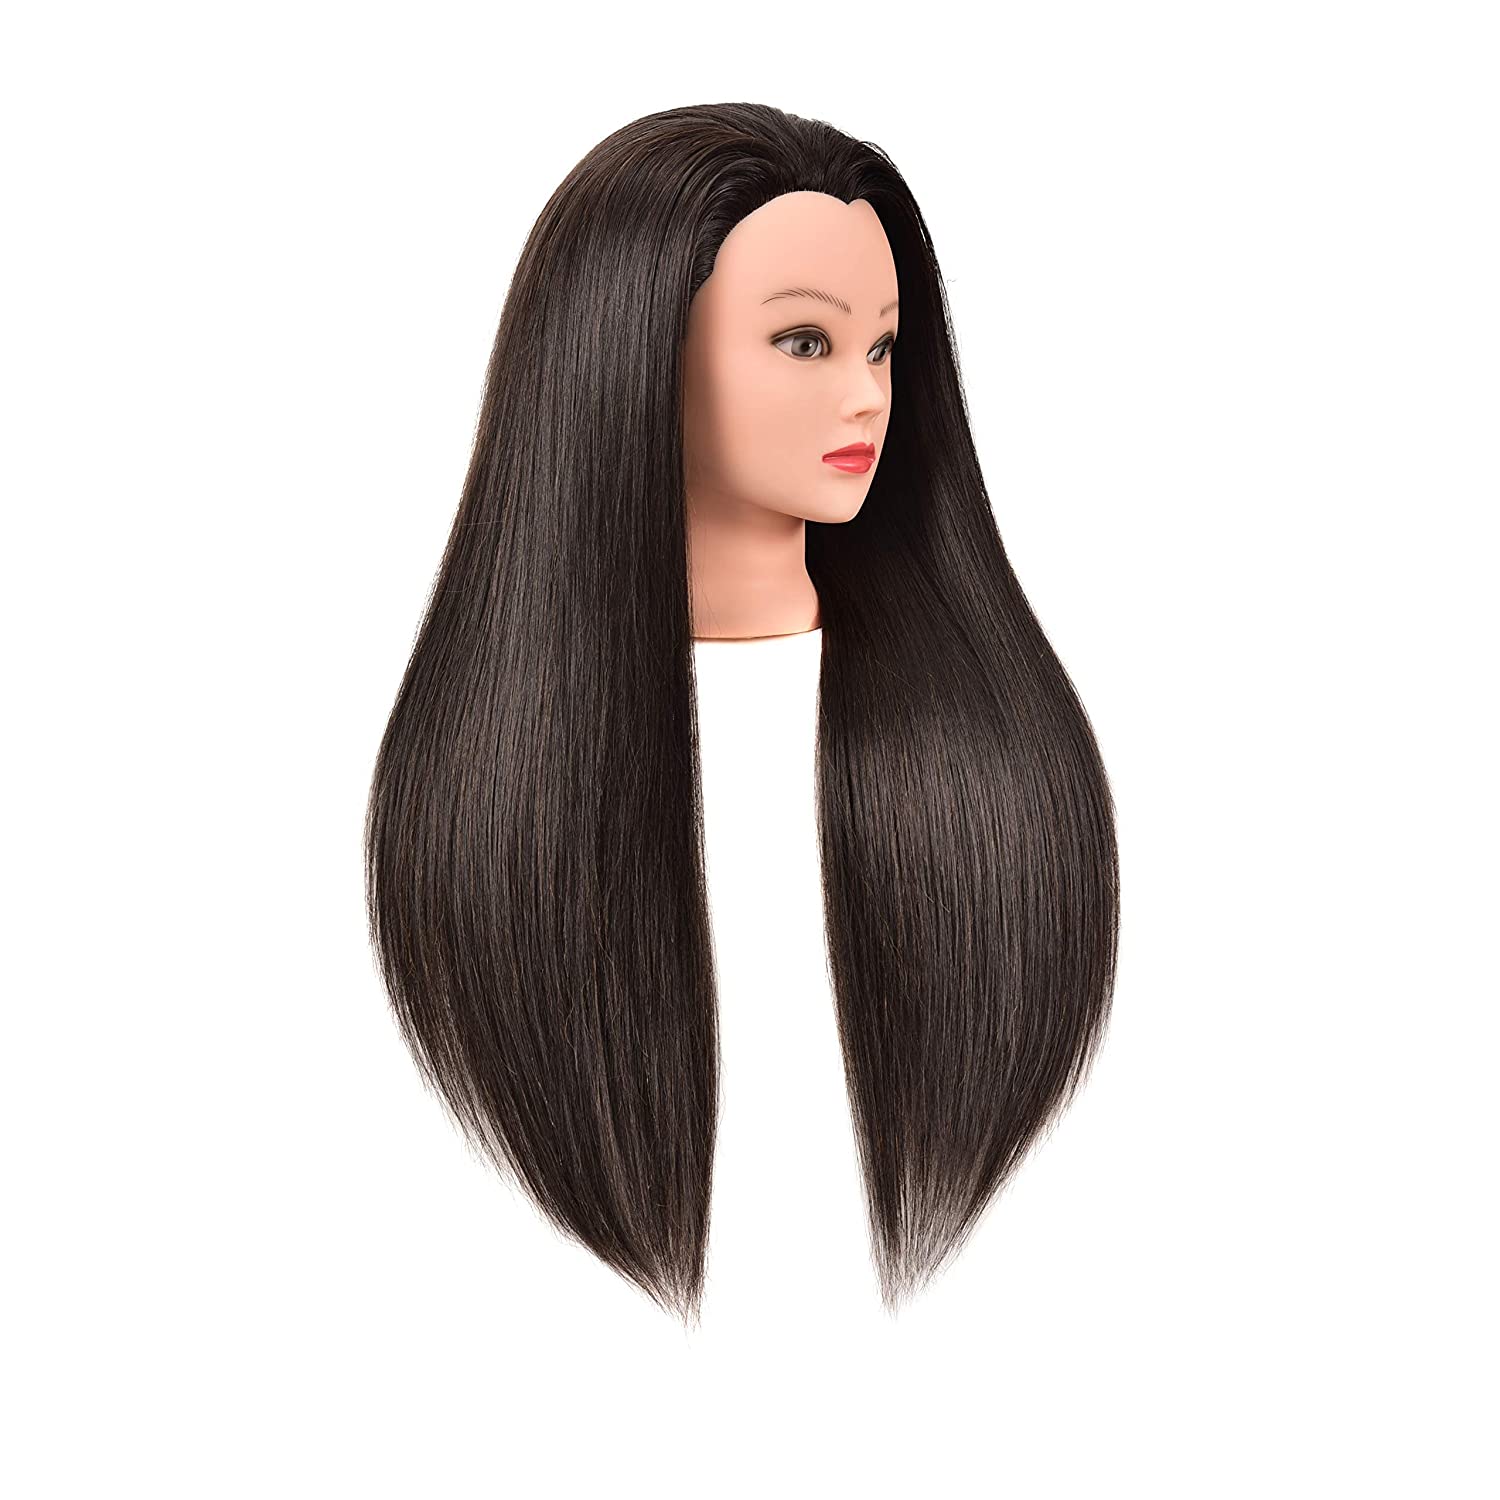 100% Human Hair Mannequin Head Styling Training Head Manikin Cosmetology Doll Head with Clamp Holder Stand 18 Inch Hair